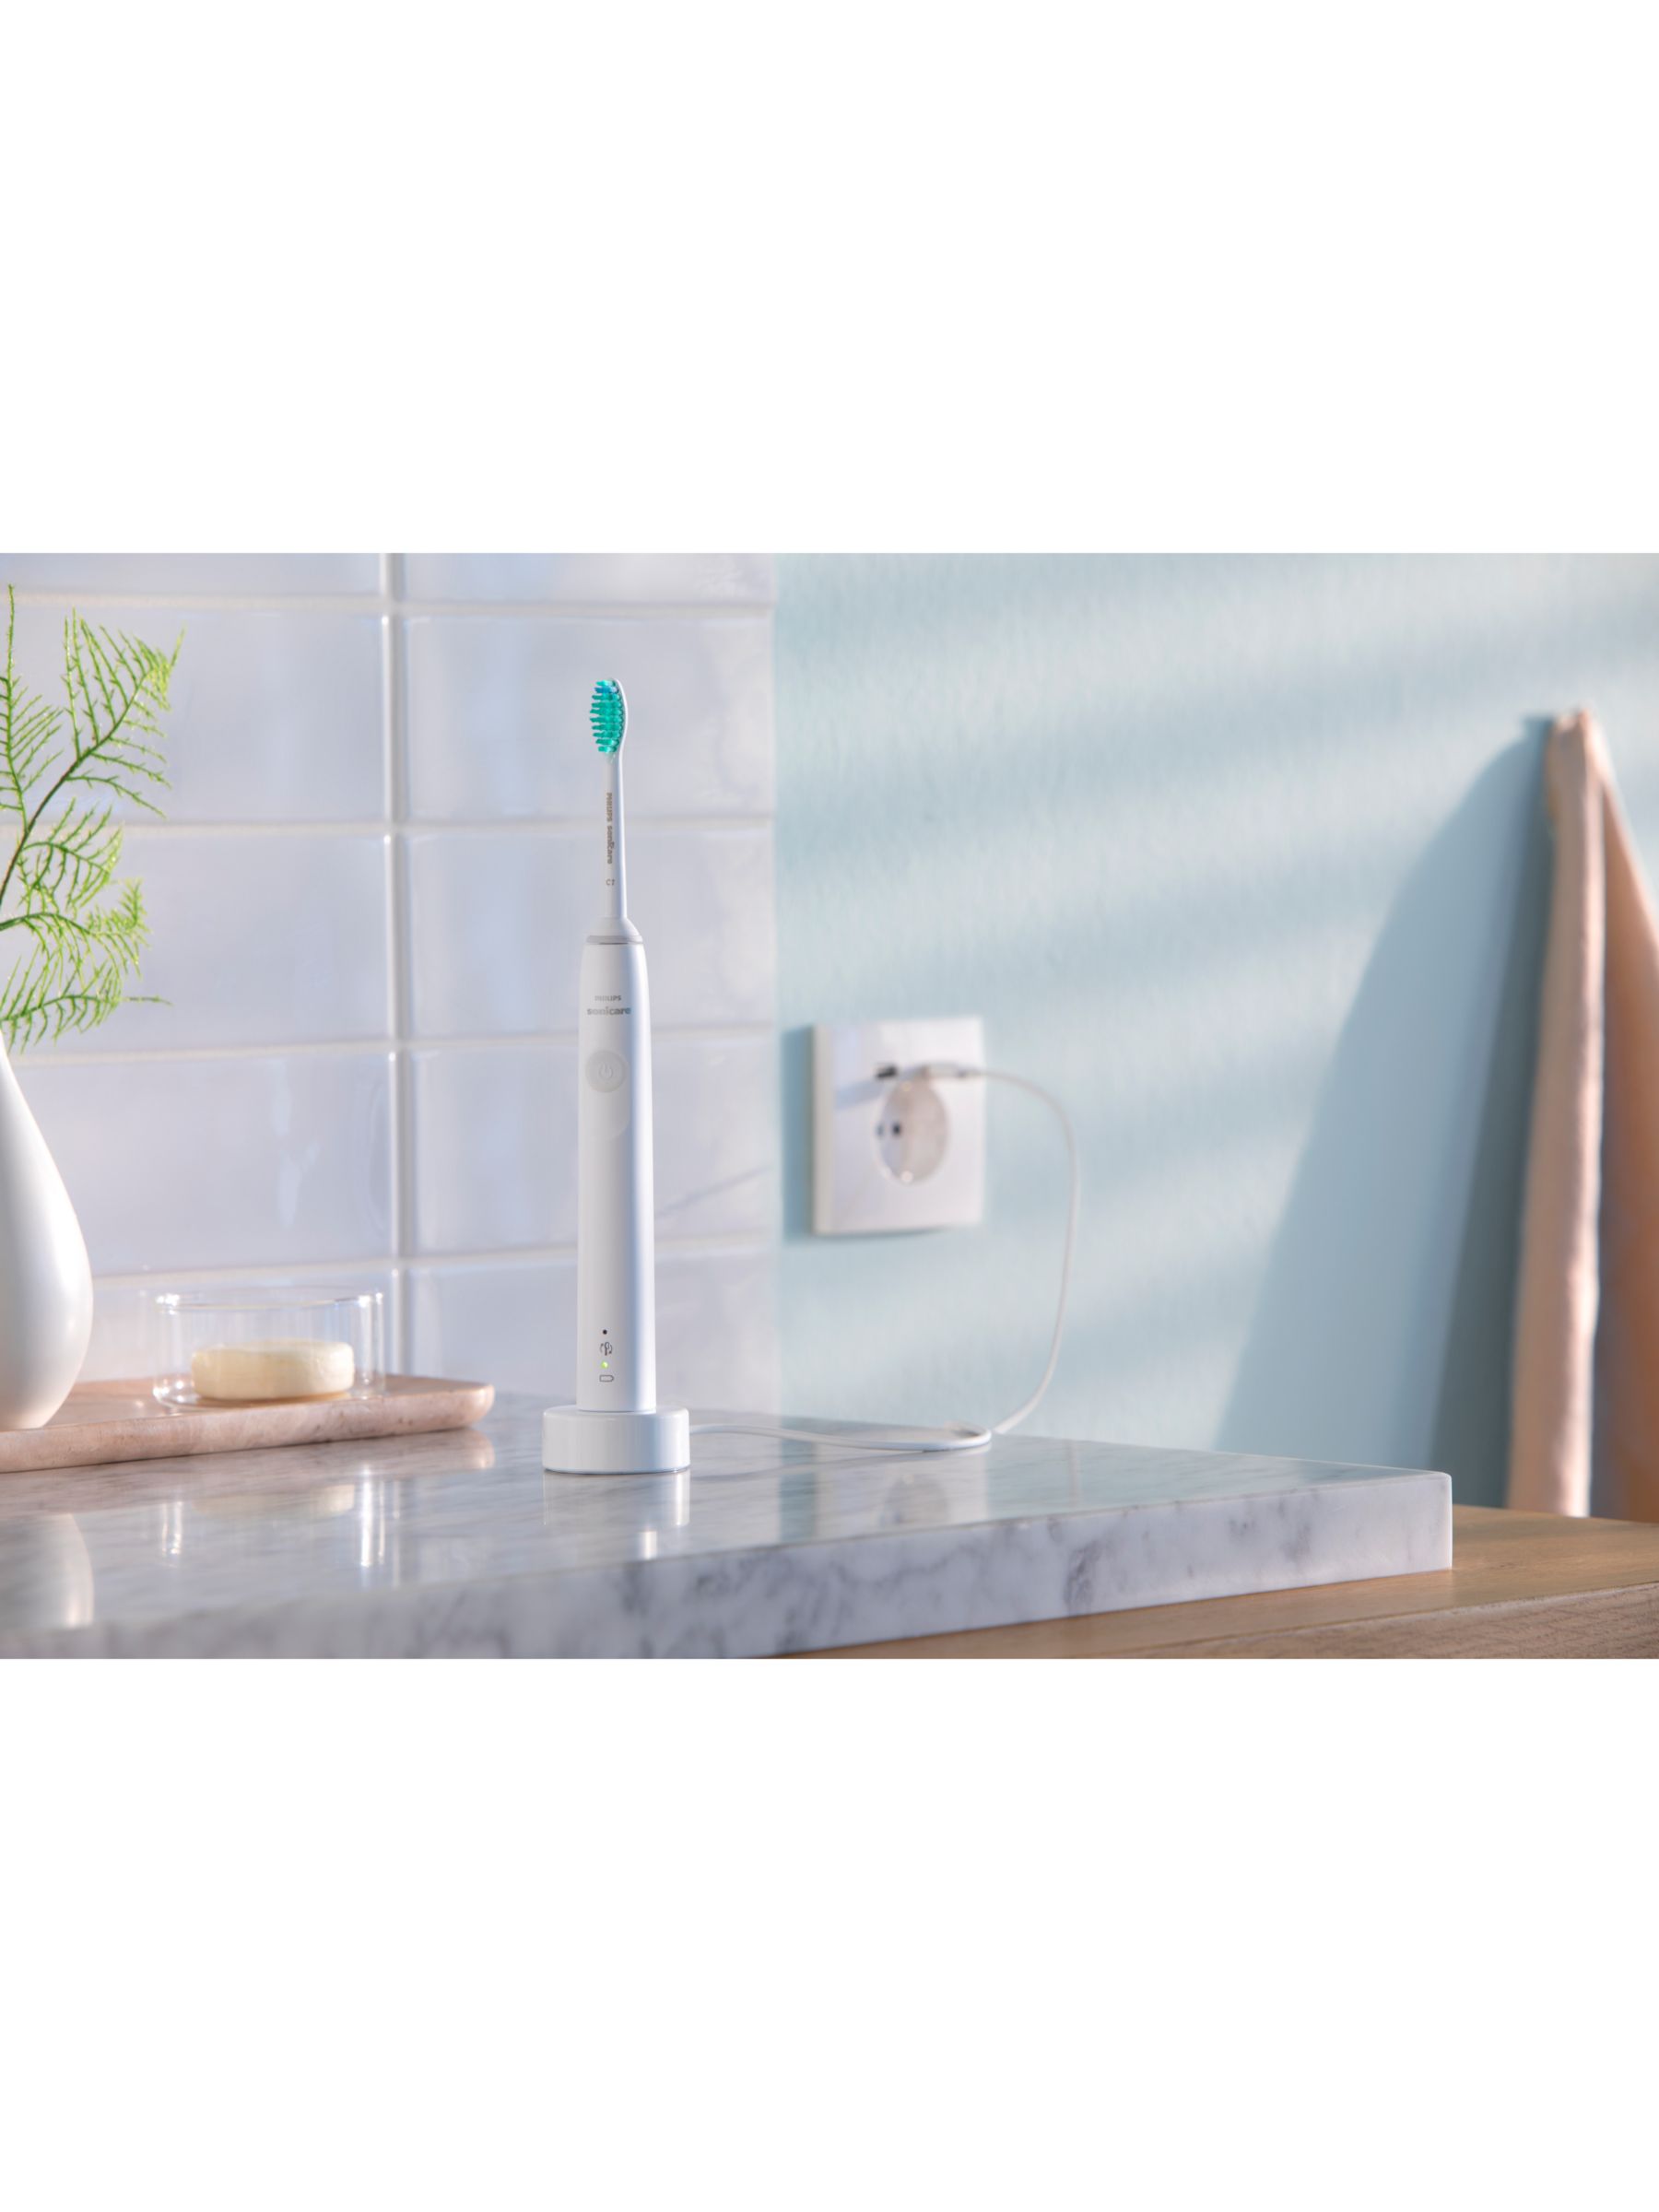 Philips Sonicare HX3673/13 Series 3100 Electric Toothbrush, White